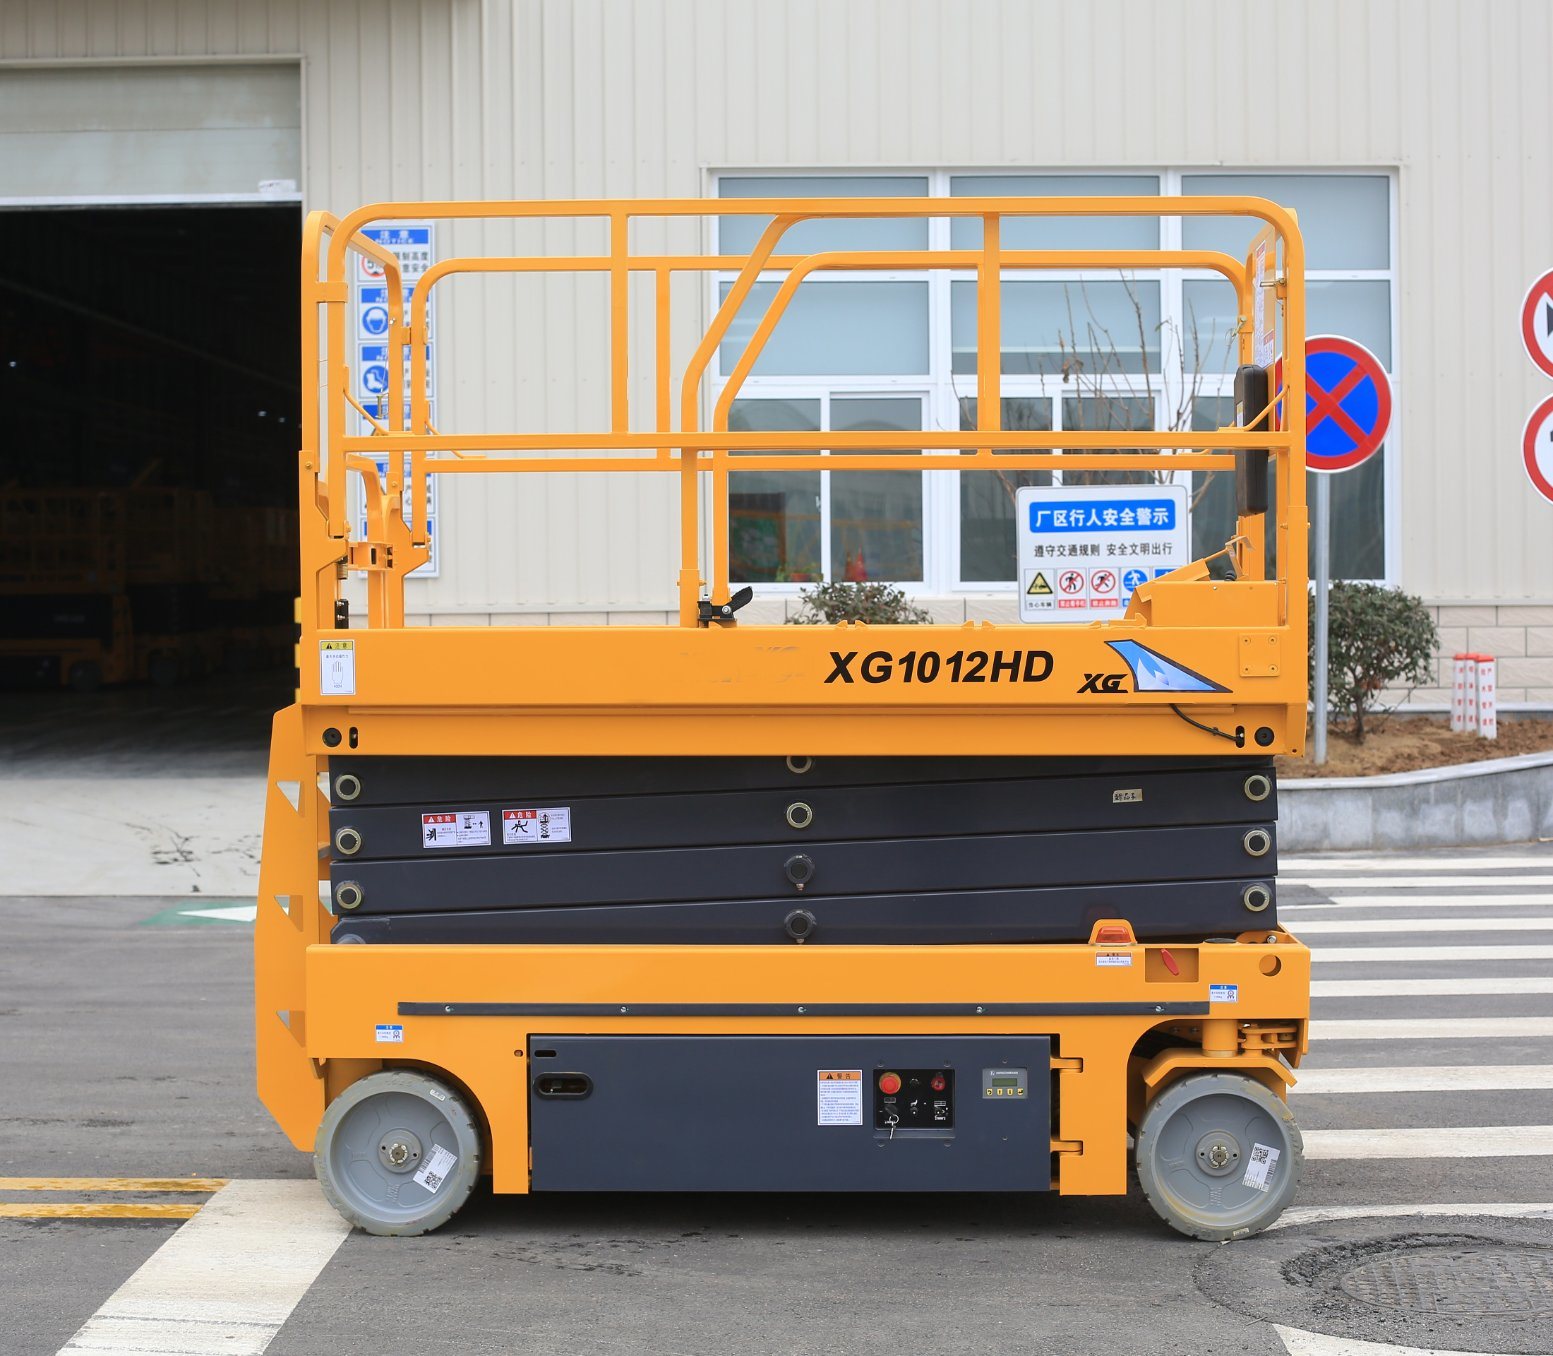 Mobile Portable Hydraulic Aerial Lifts Sing Mast Aluminum Lift Platform Xg1012HD with 8m 10m Lifting Height